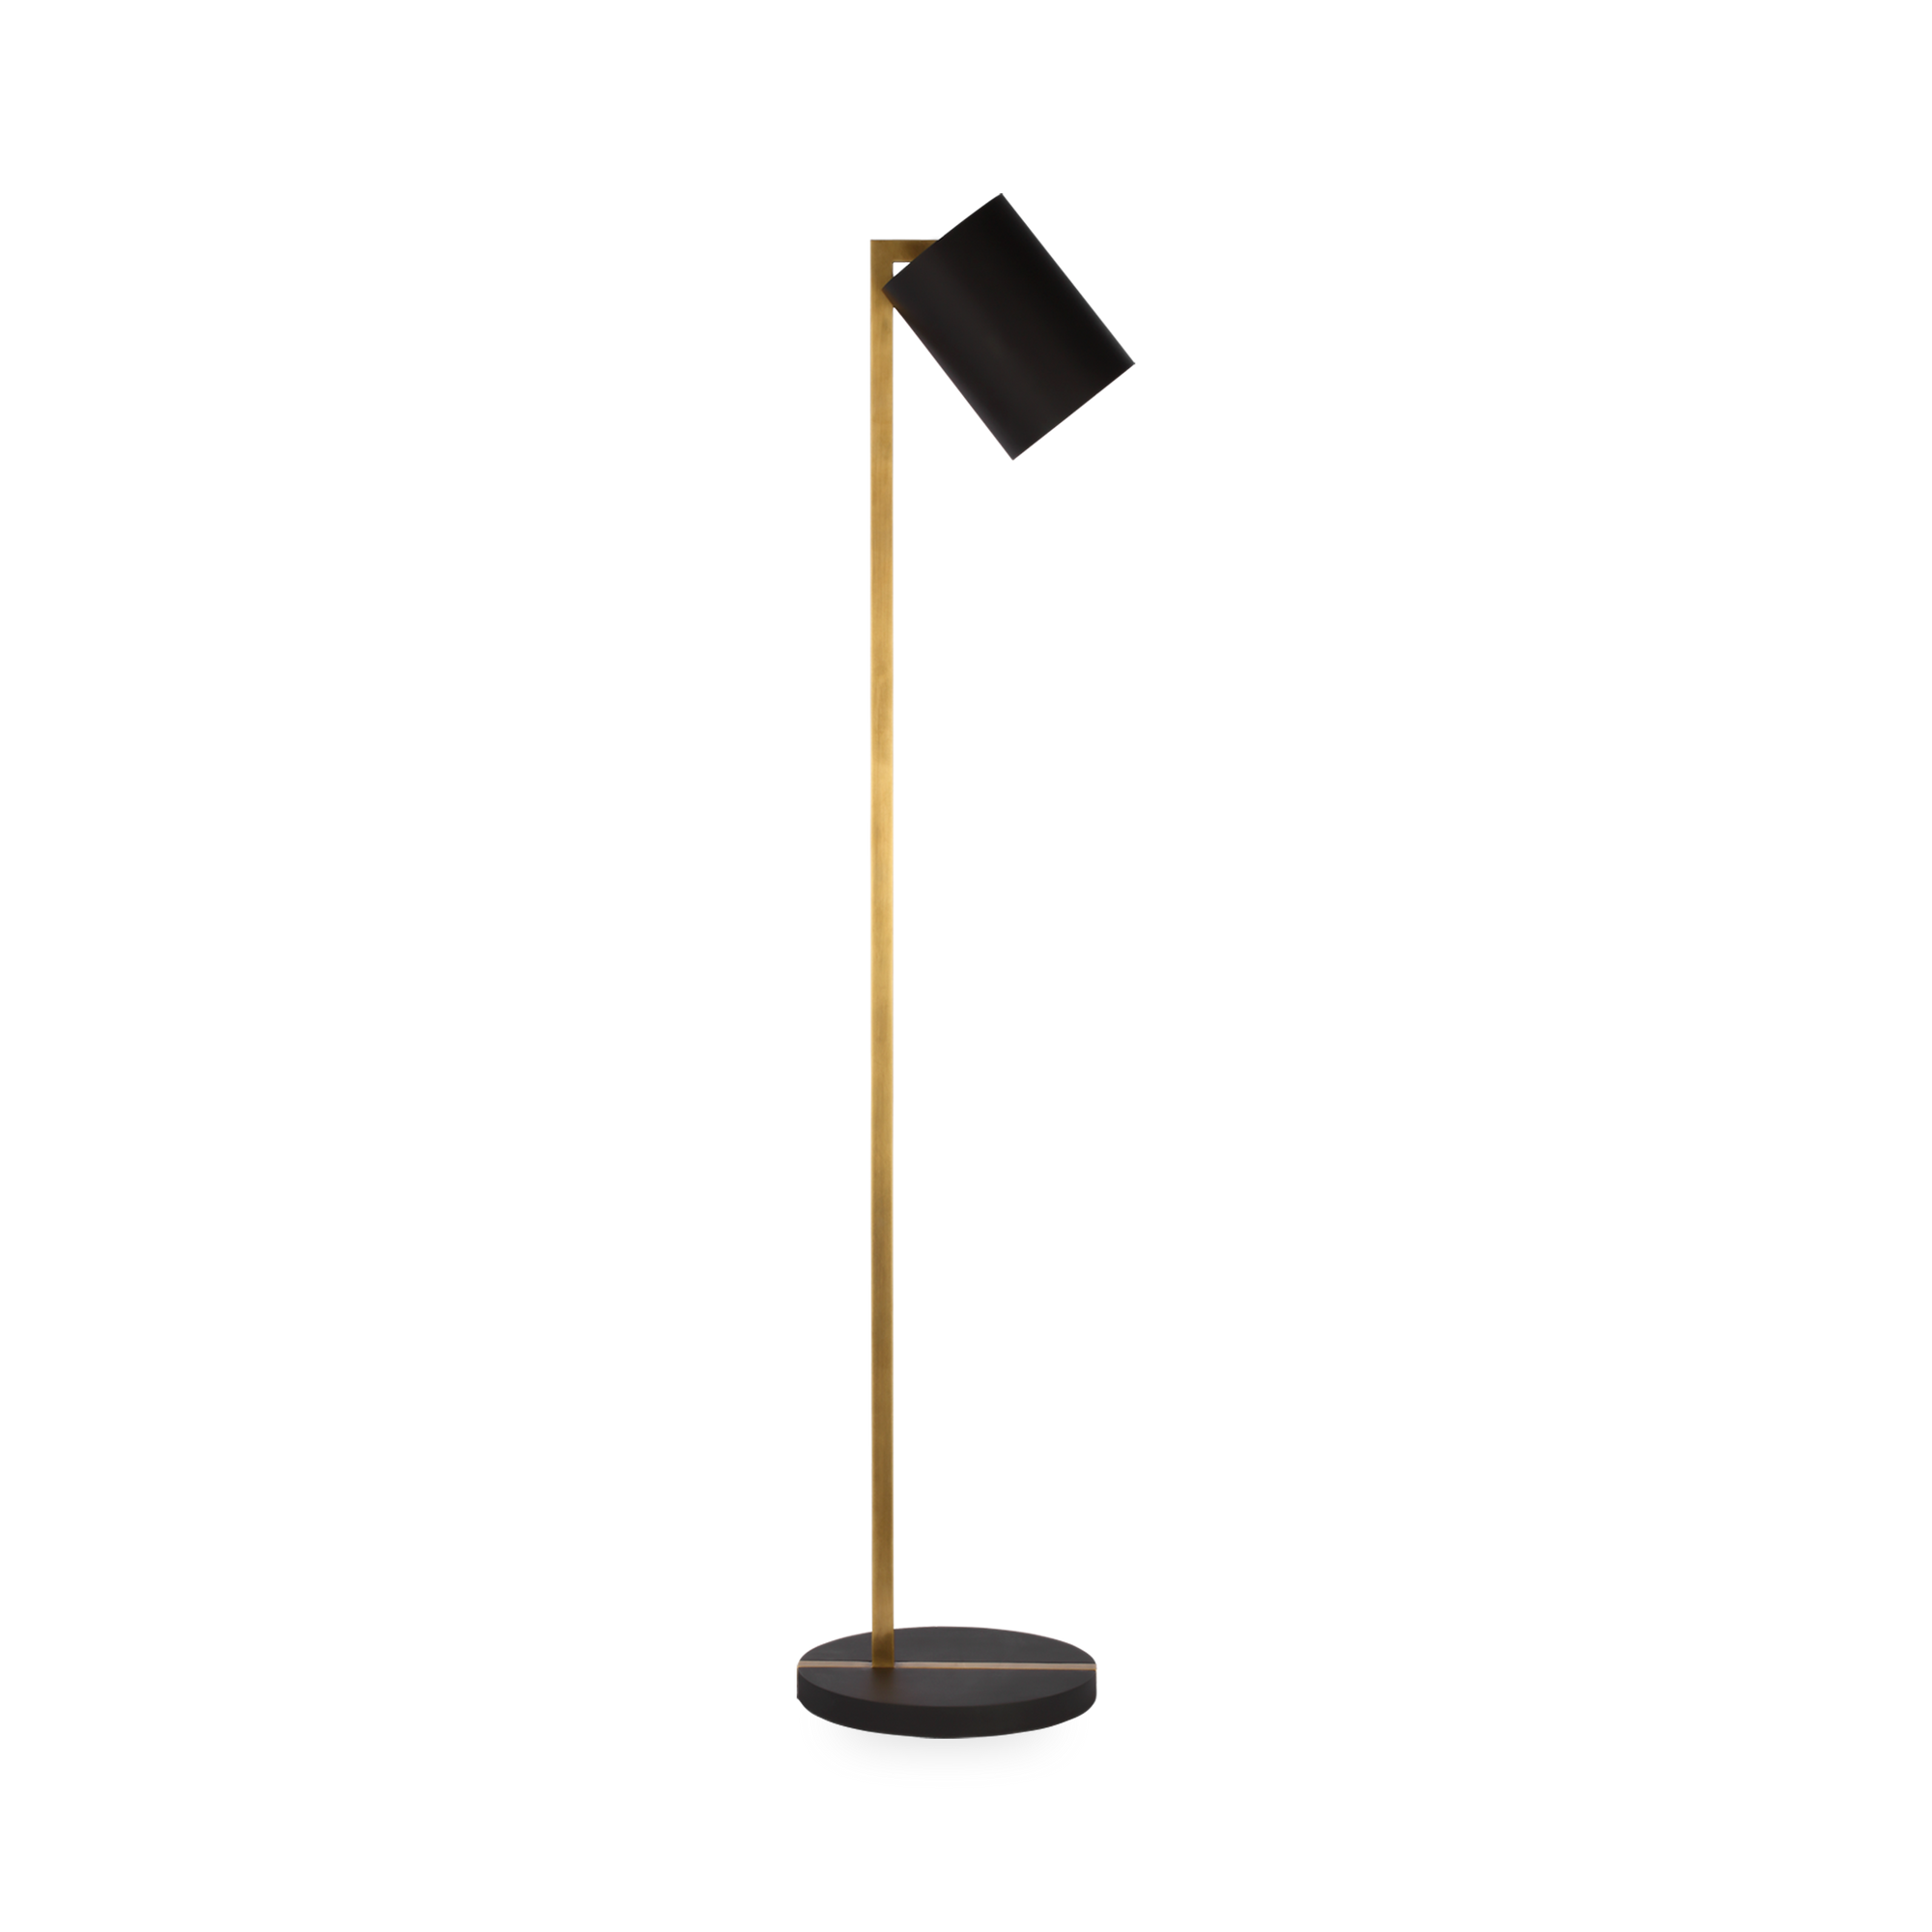 The Anthony Floor Lamp bridges elegance and function, with a modern edge.